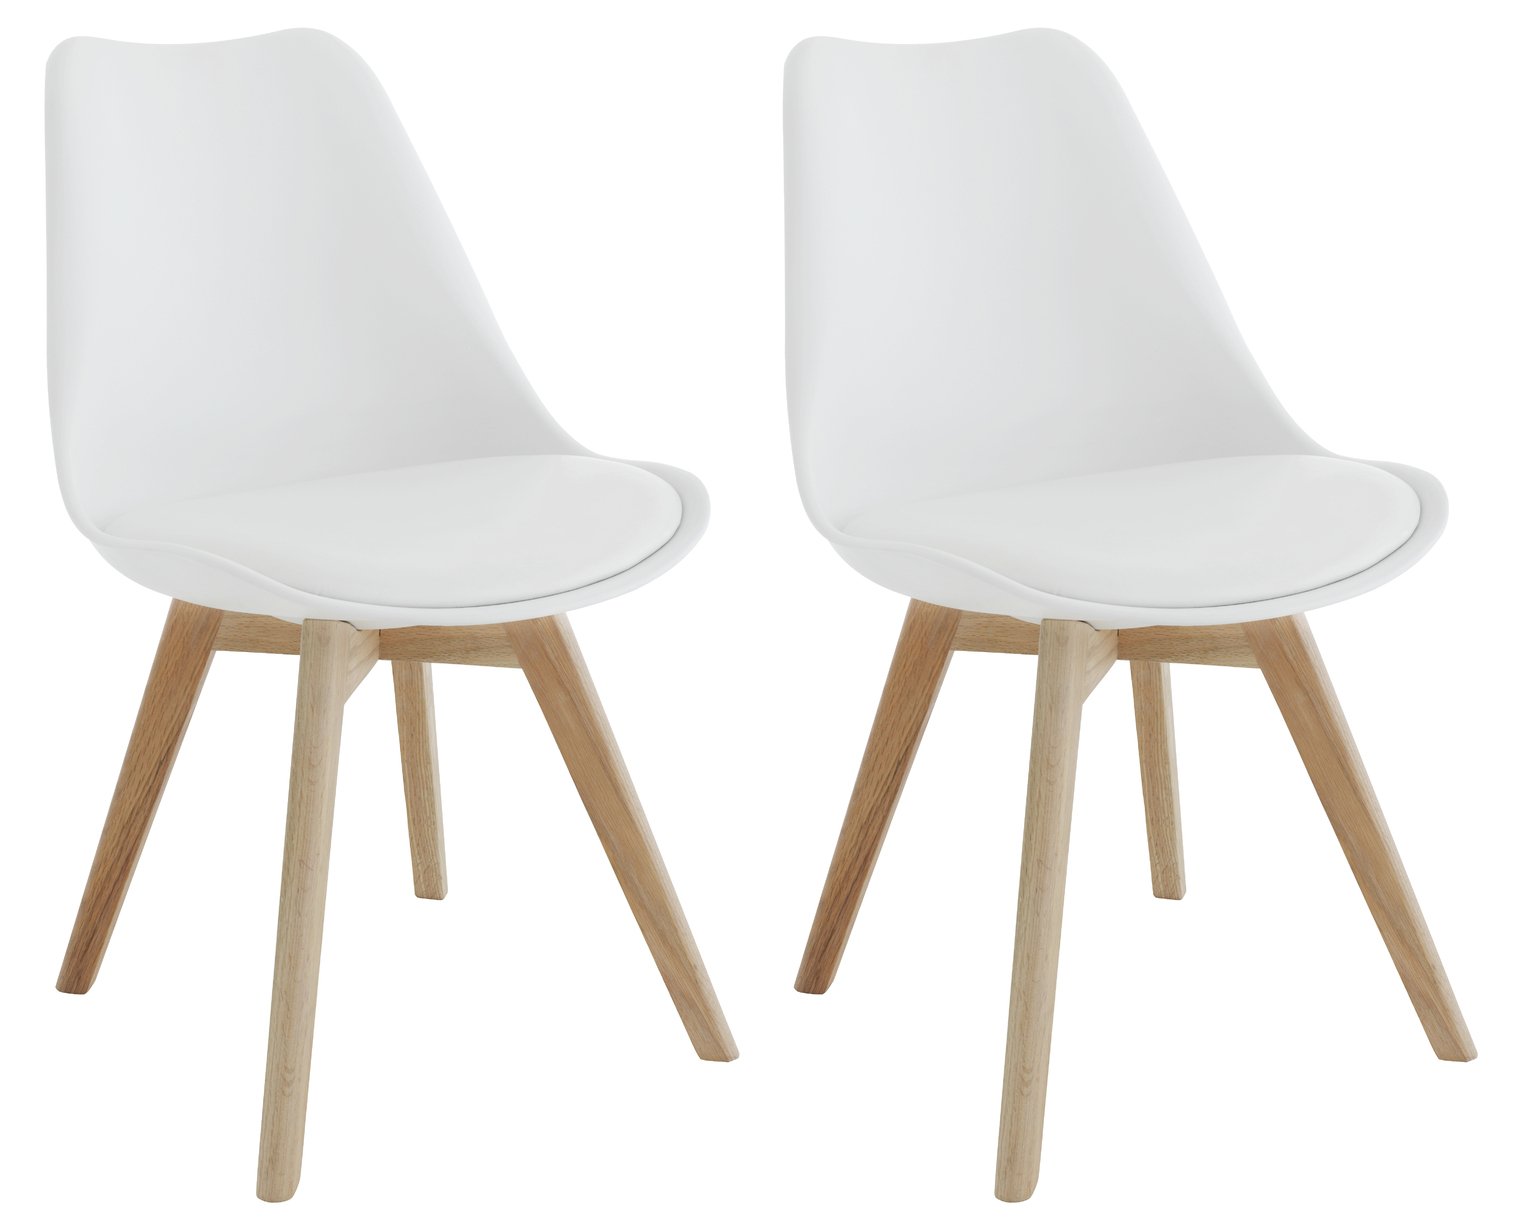 Habitat Jerry Pair of Dining Chair - White